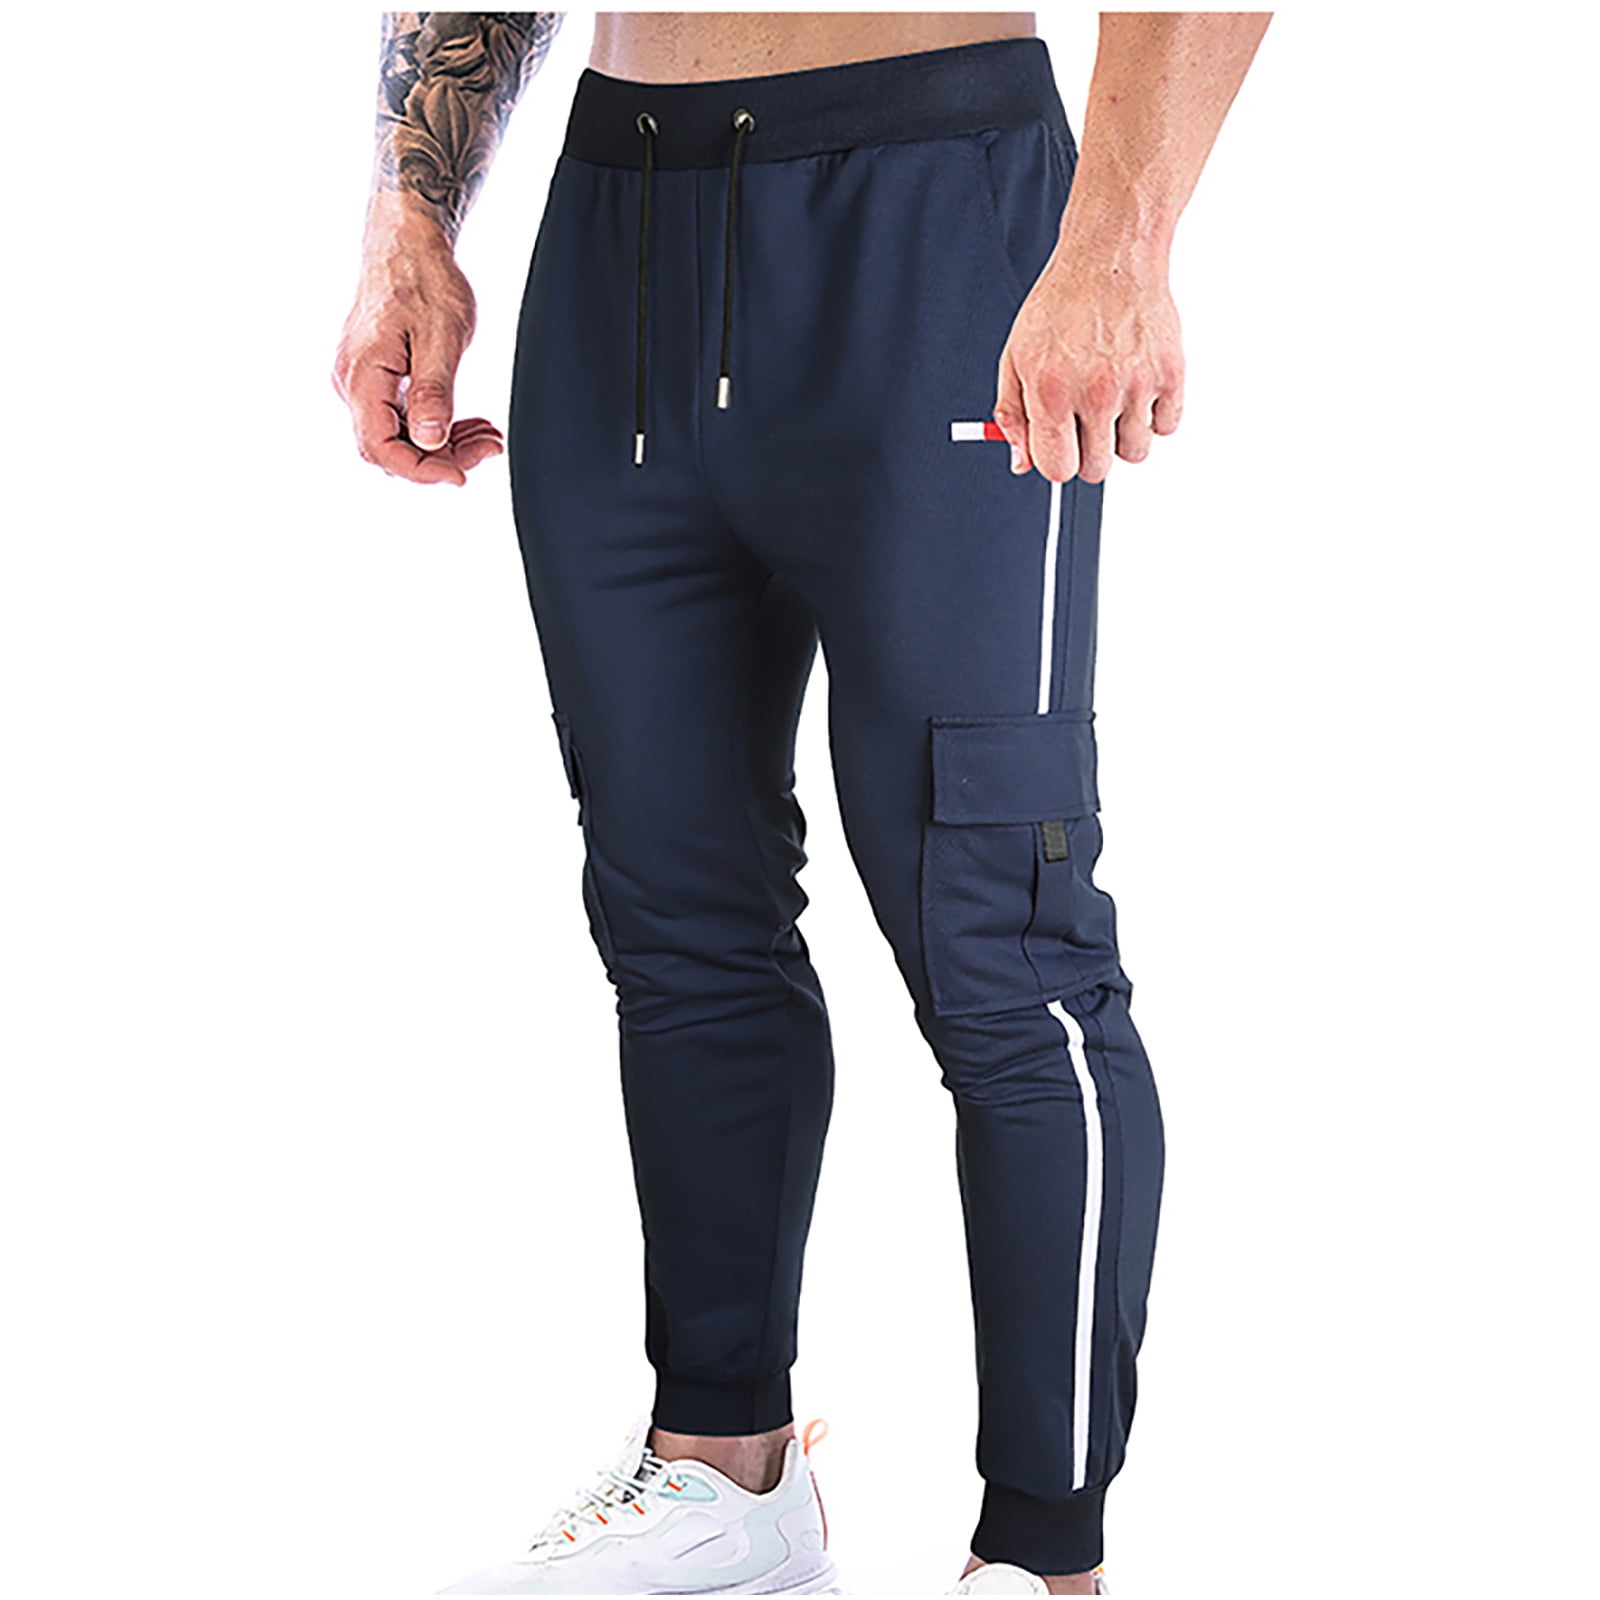 Born Tough Slim-Fit Mens Workout Joggers Pants, Tapered Bodybuilding Gym  Joggers, Athletic Running Sweatpants Zipper Pockets